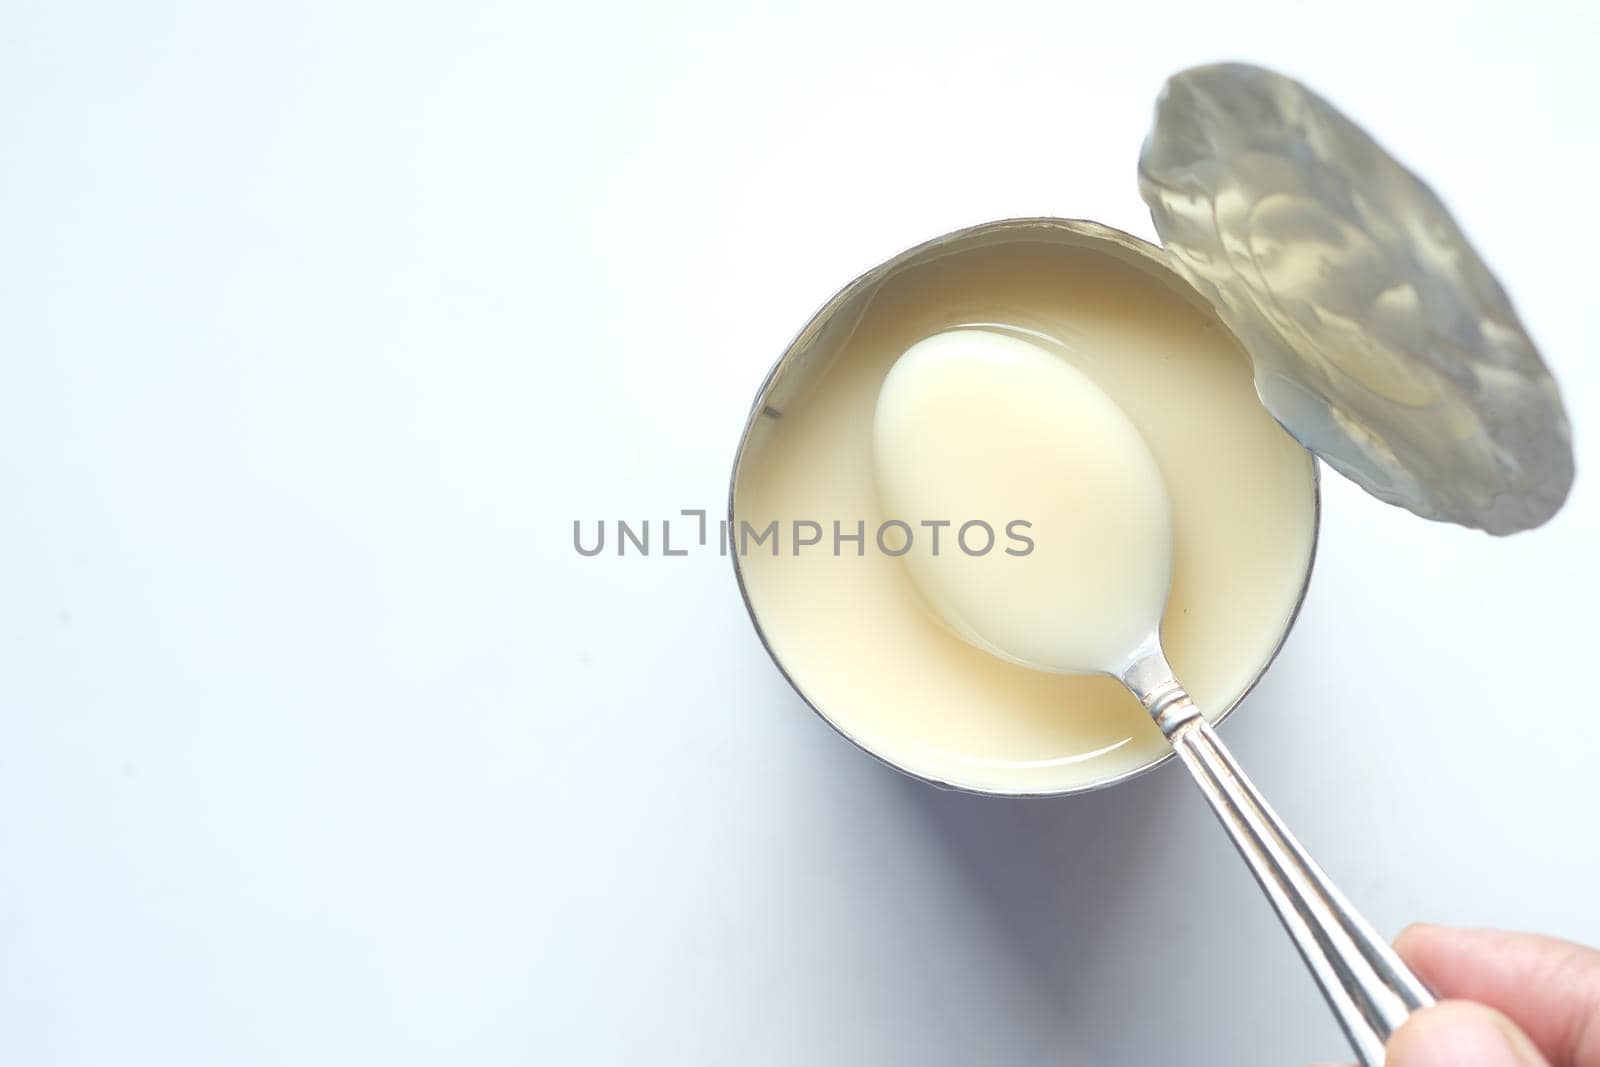 condensed milk in a bowl close up